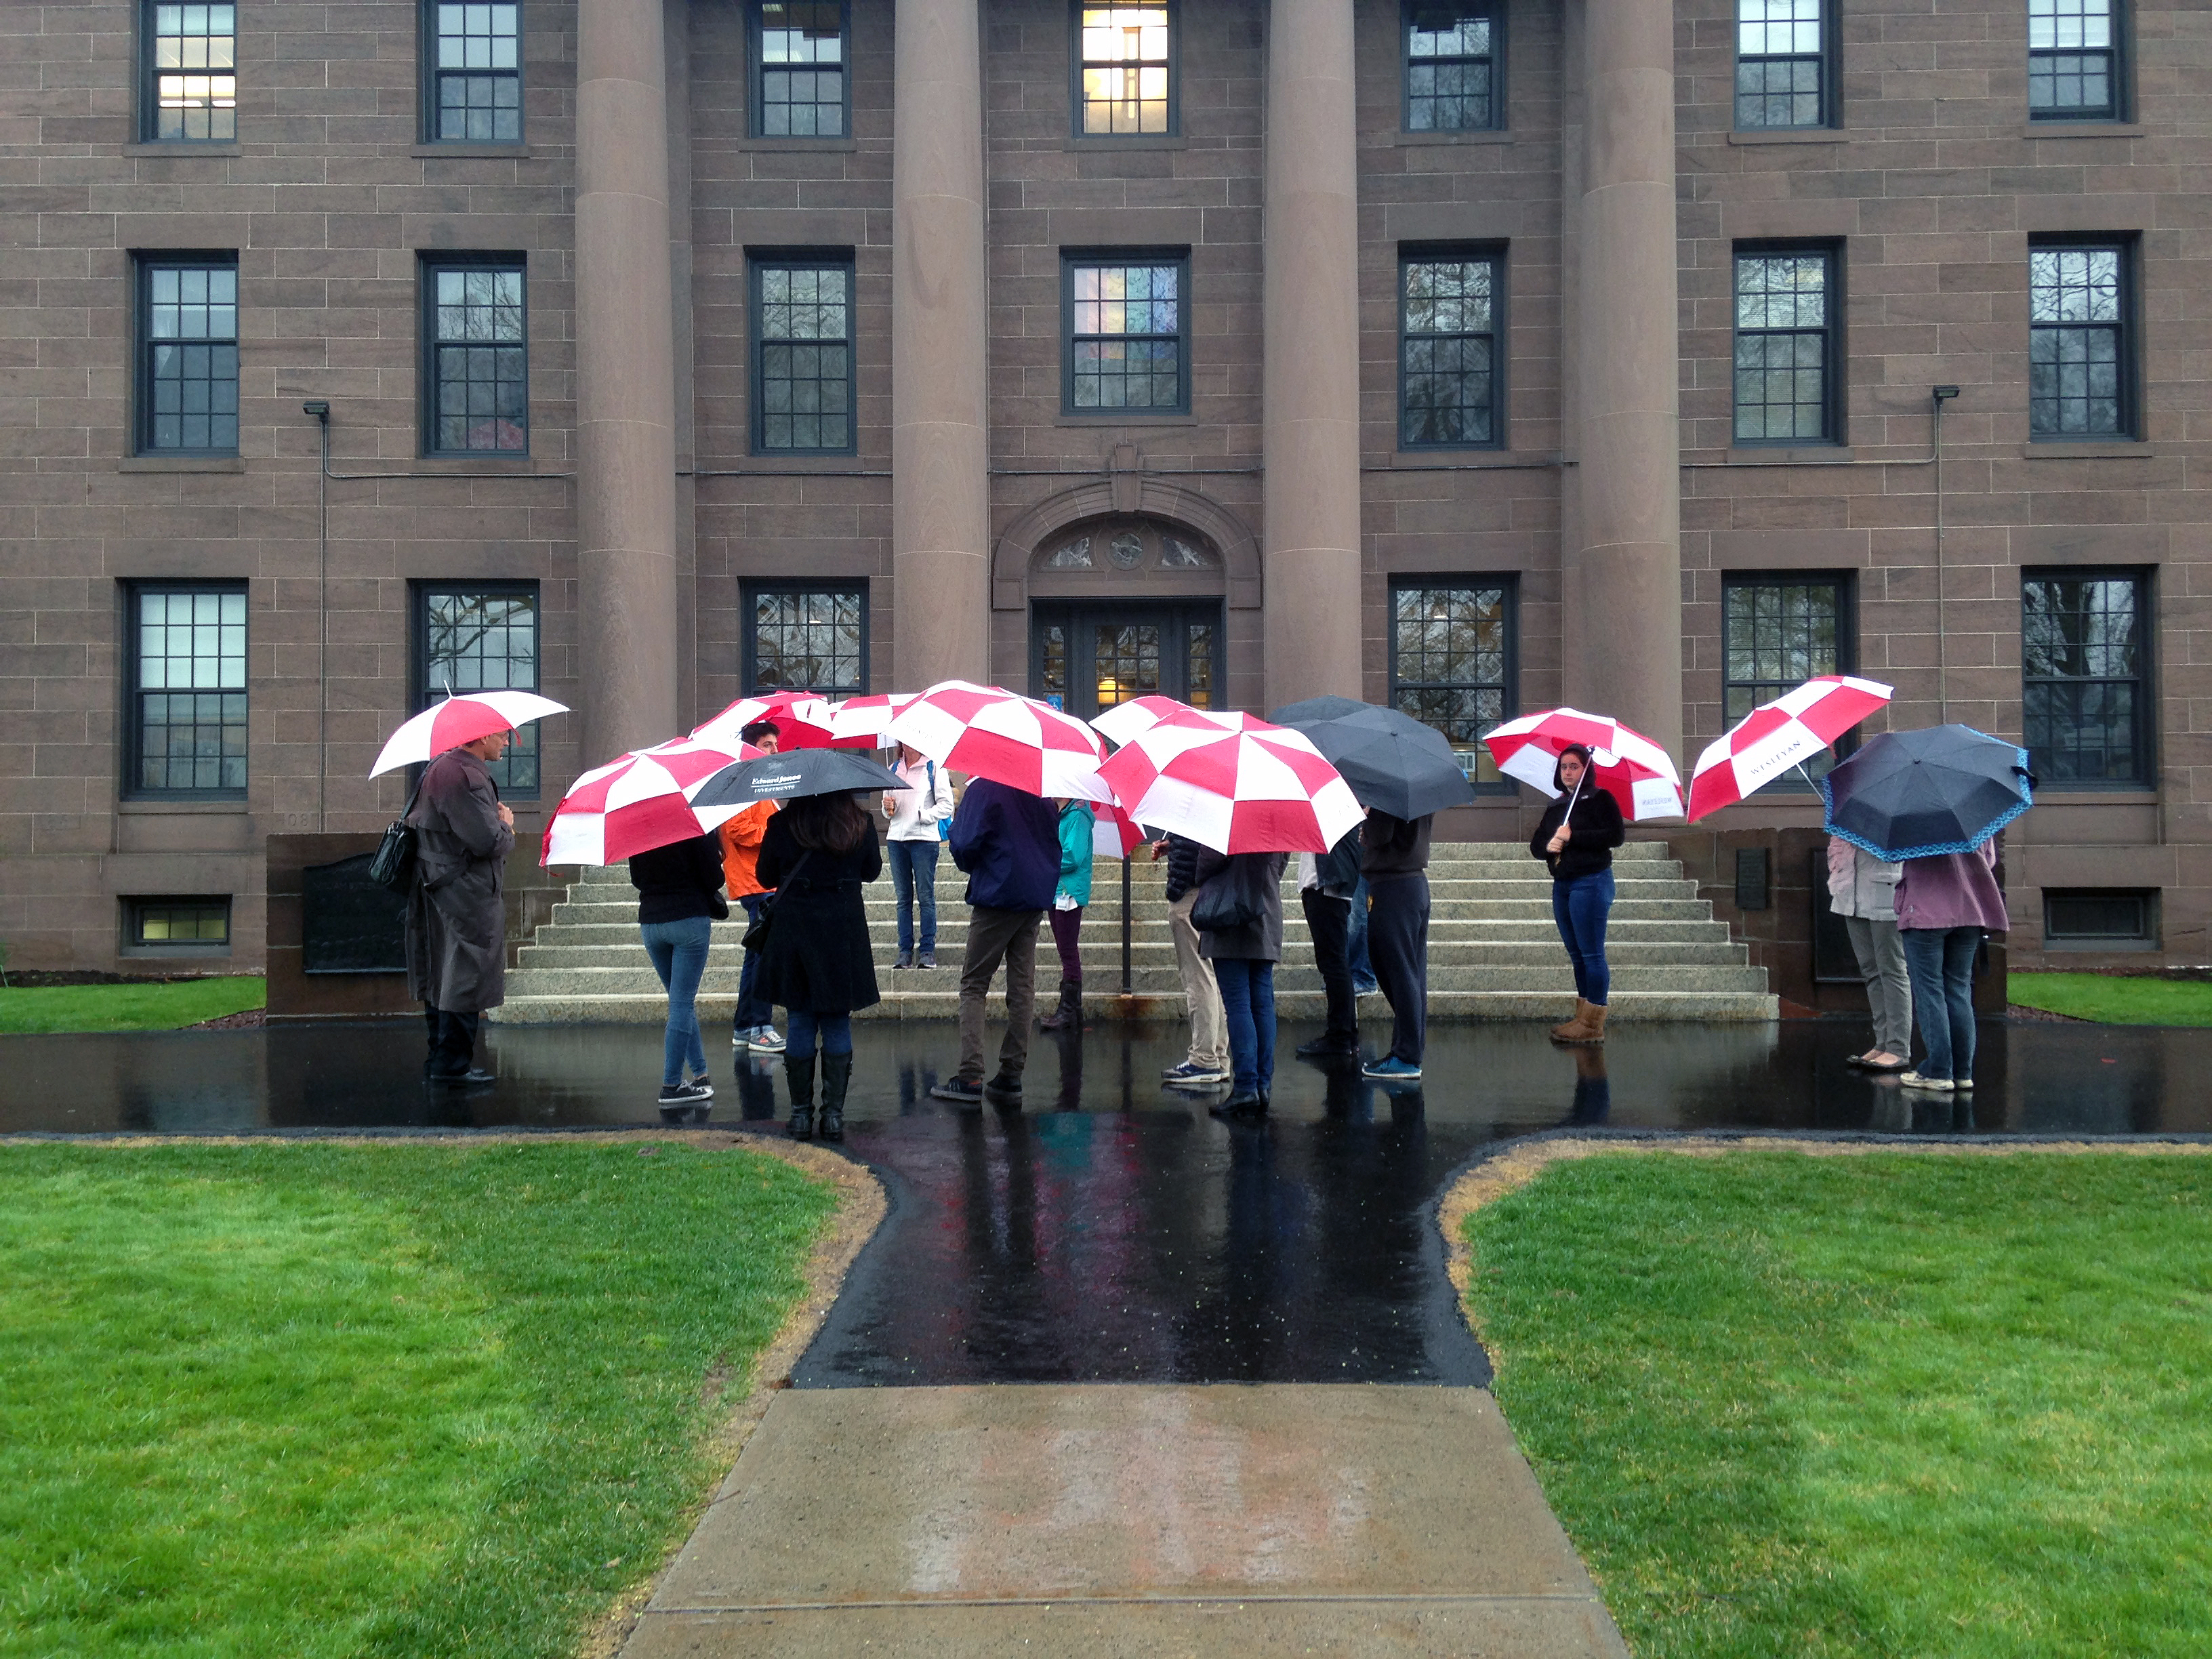 In a moment of serendipity, Wesleyan President Michael Roth found his walk to work coinciding with the path of an Admission tour group. With his red umbrella aloft, he walked into the crowd of prospective parents and students near the steps of North College. He listened for a while before blowing his cover by asking “Does anyone have any questions for the president this morning?”   Members of the group captured the moment on their smartphones. 